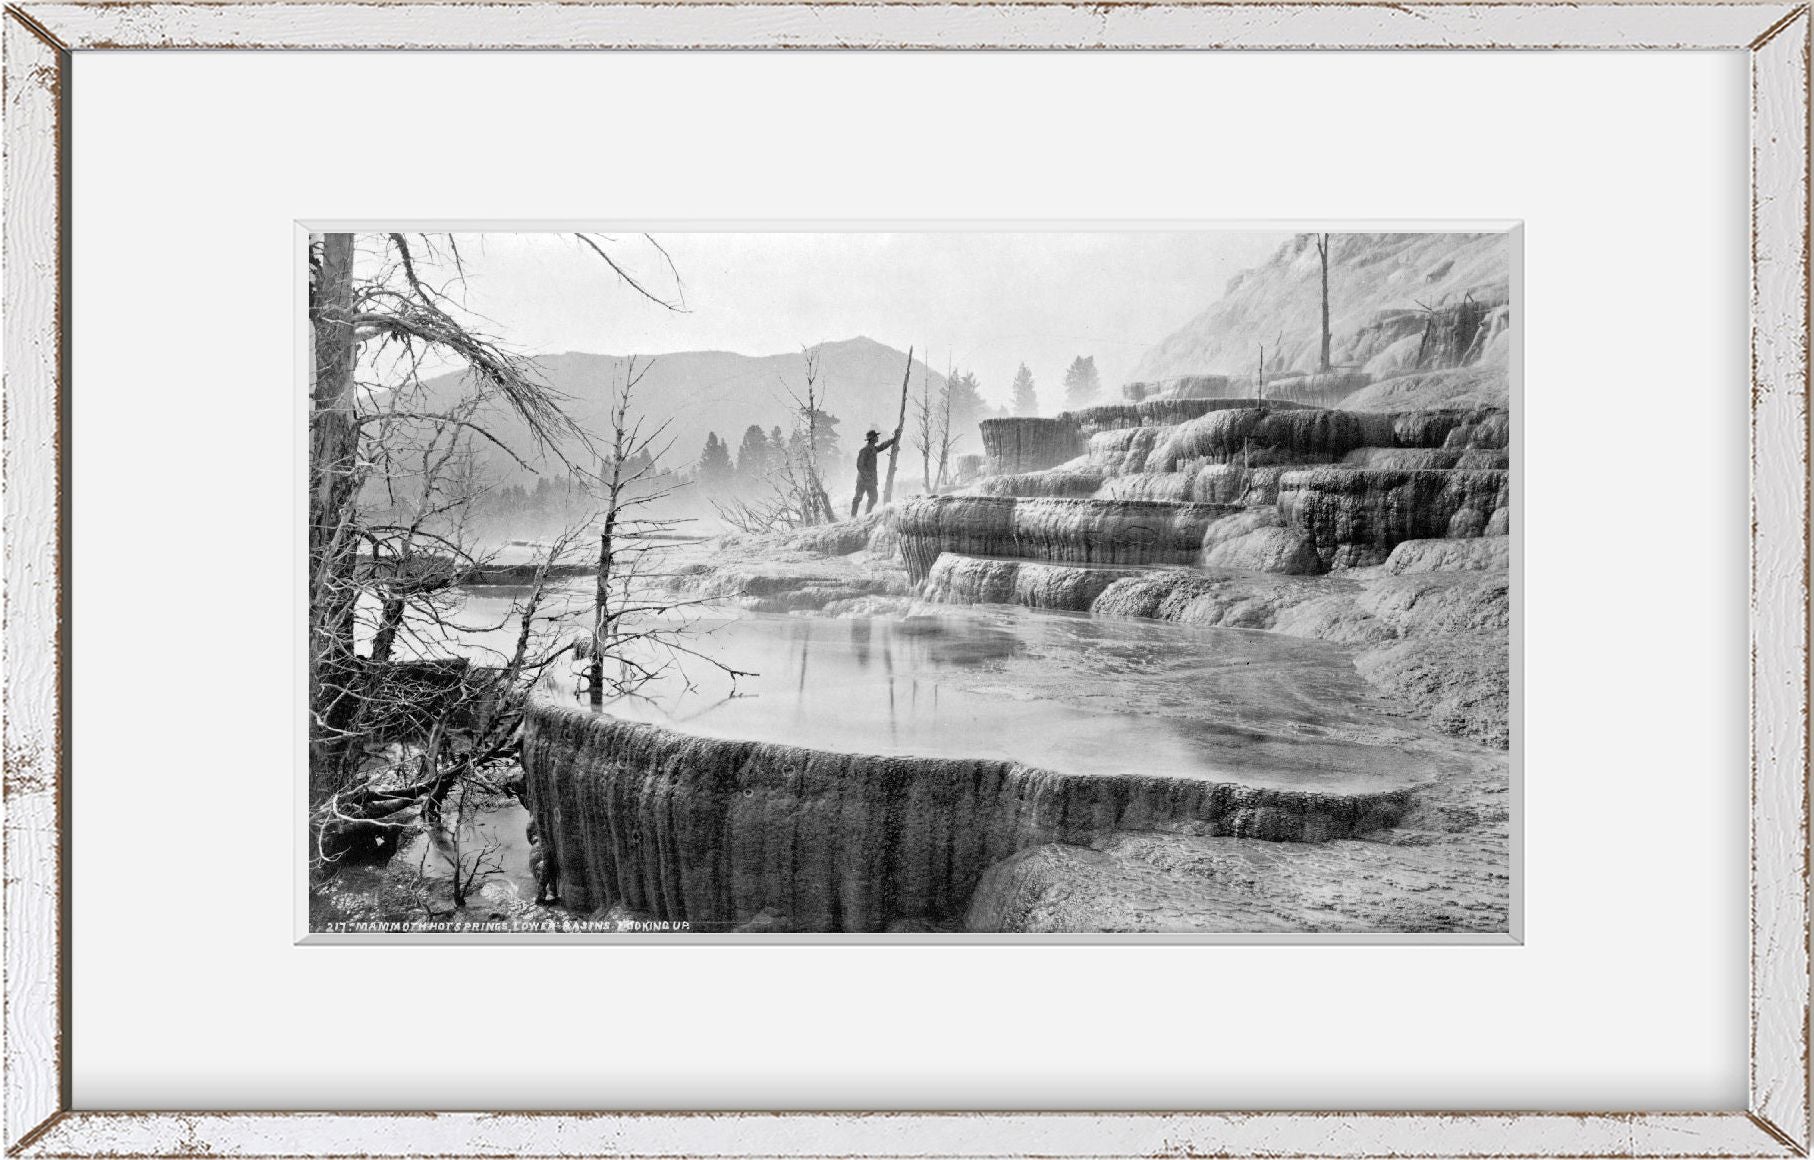 ca. 1872 photograph of Scenery of the Yellowstone National Park. 217 Mammoth Hot